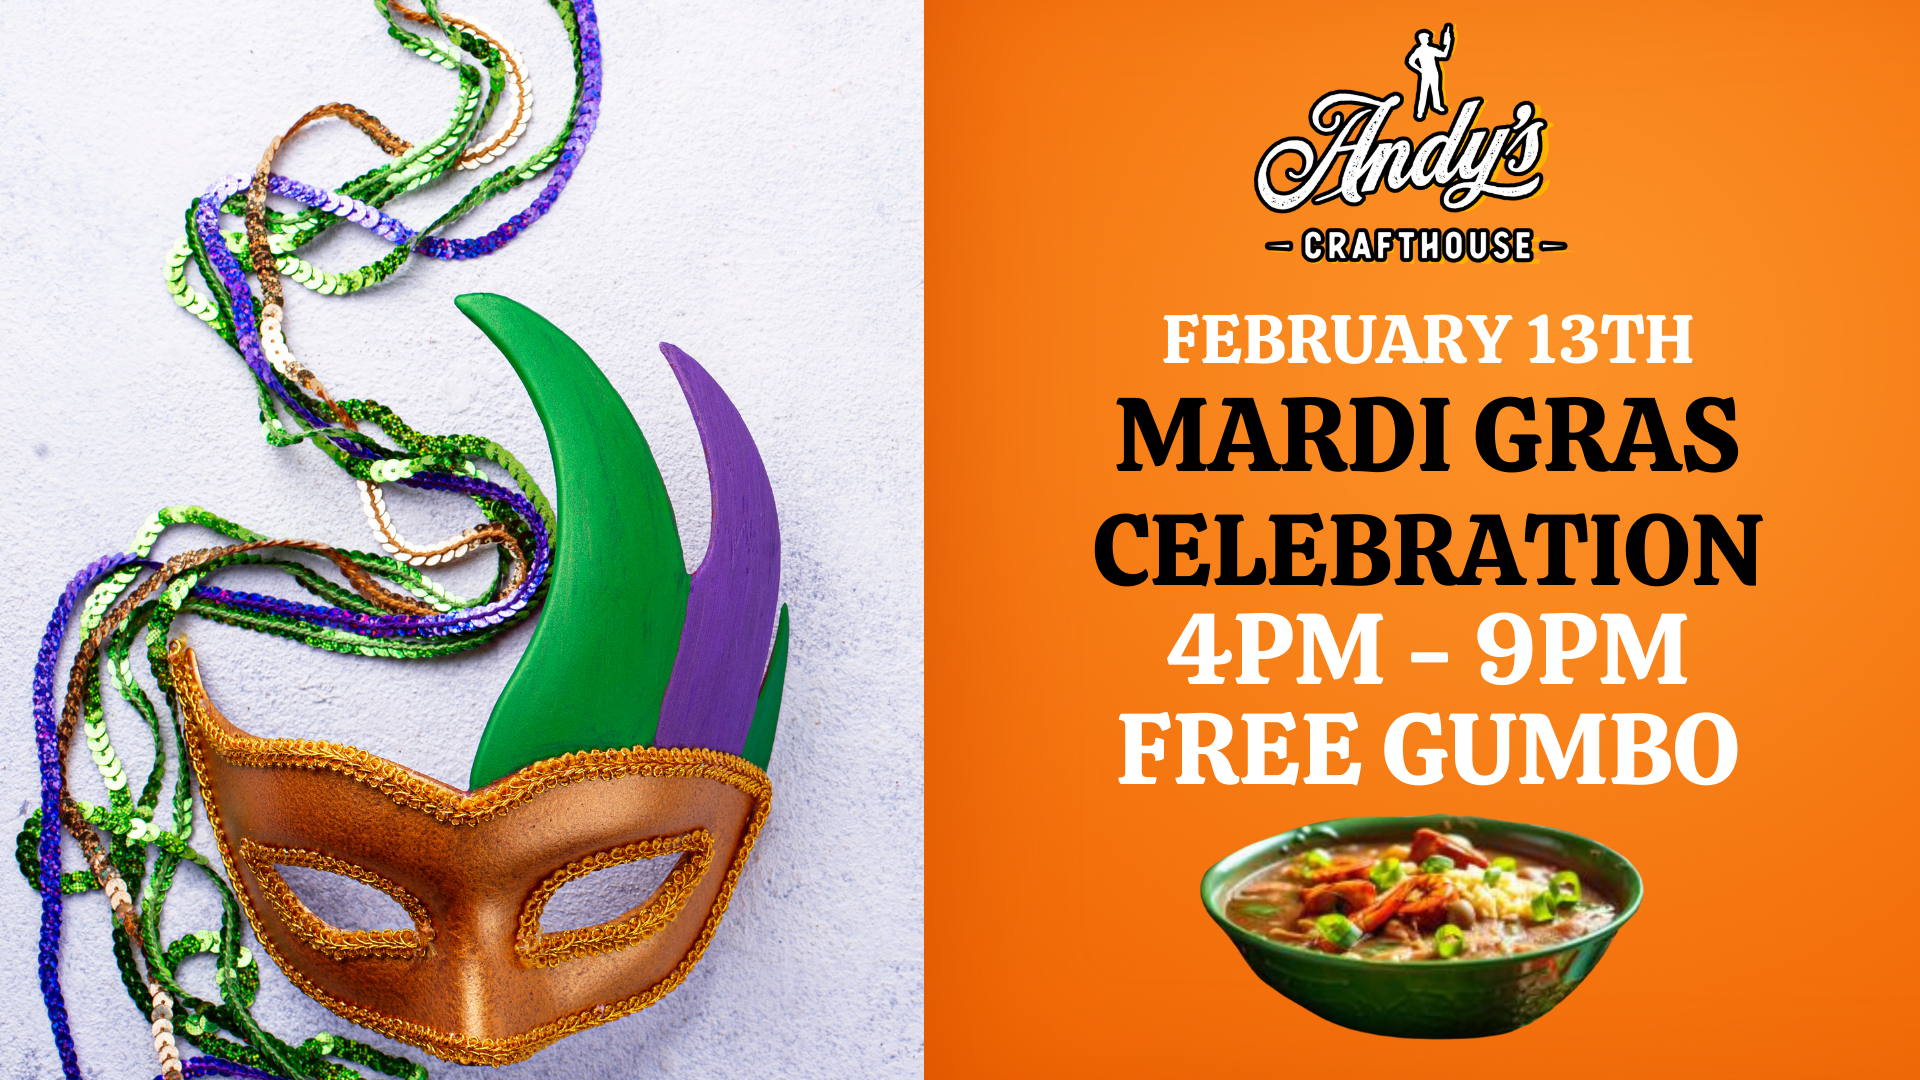 Mardi Gras Celebration at Andy's Crafthouse